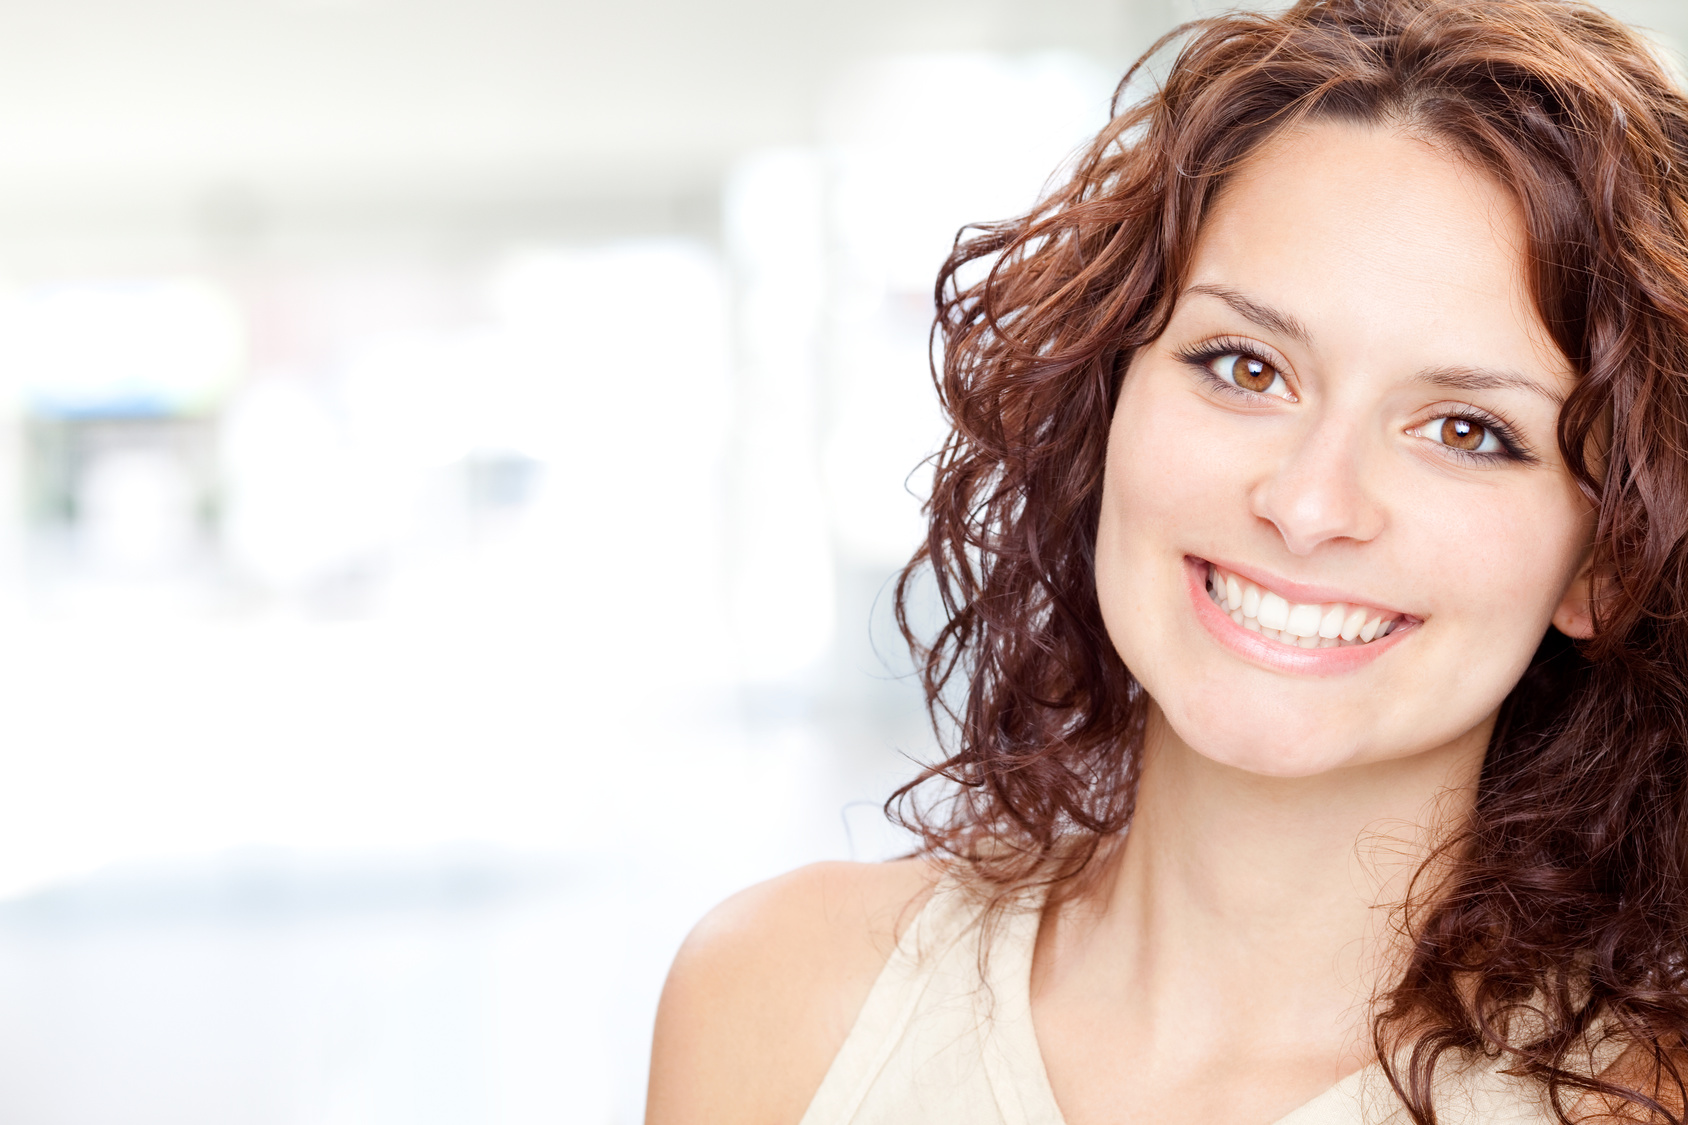 Smile Designing - Making Your Better Smile To The Best